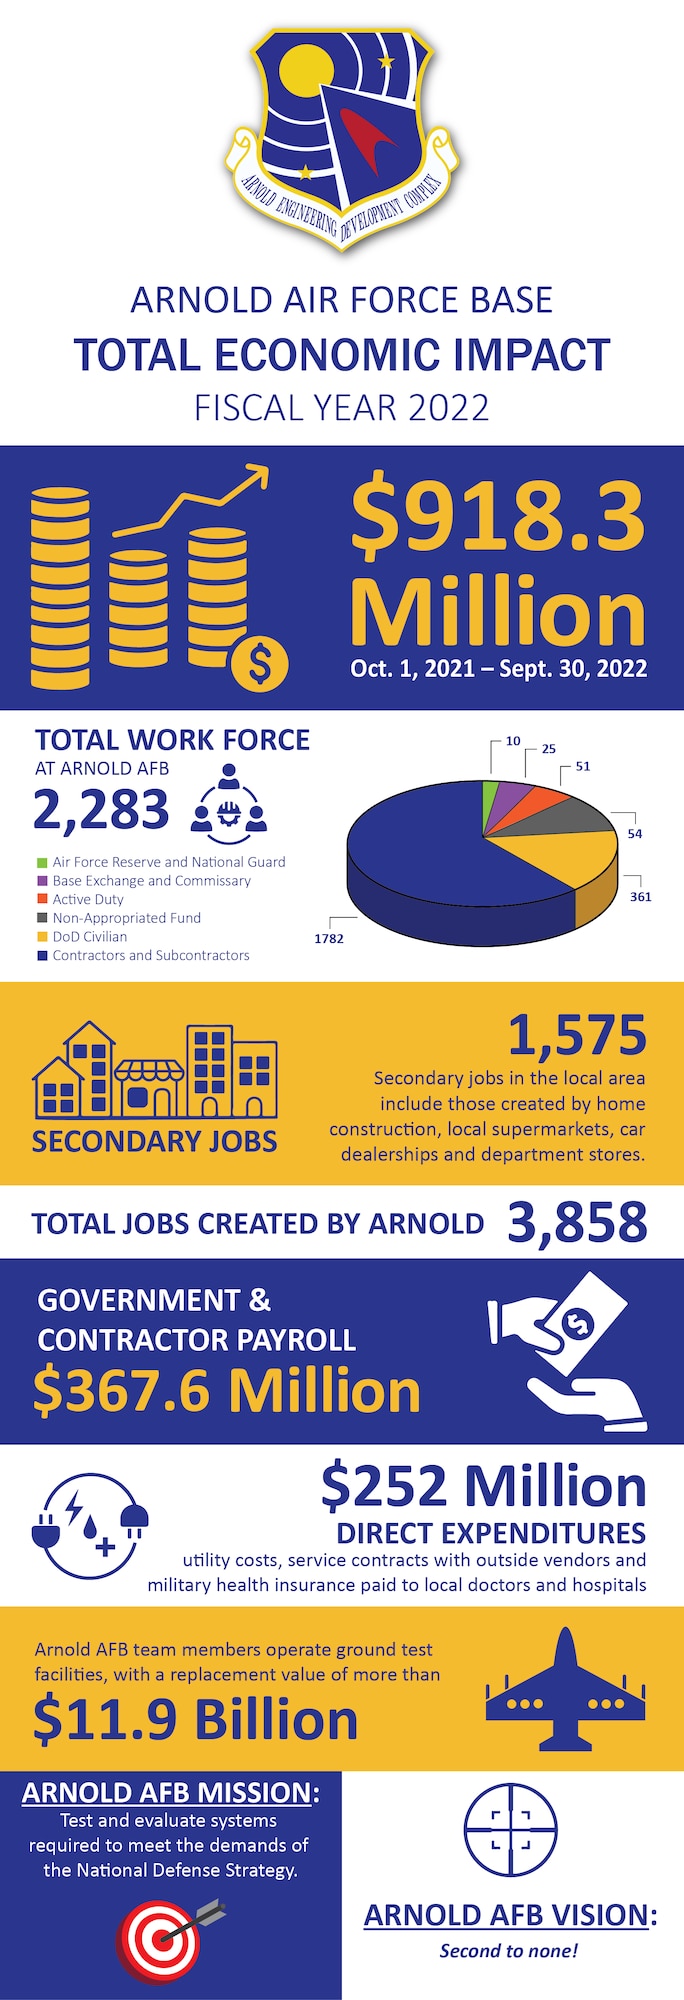 The economic impact of Arnold Air Force Base across the state of Tennessee was $918.3 million for the 2022 fiscal year. Local areas were impacted through payroll, secondary jobs created through local spending, and other expenditures for supplies, utilities, fuel and services and the spin-off impact of those purchases. (U.S. Air Force graphic by Brooke Brumley)